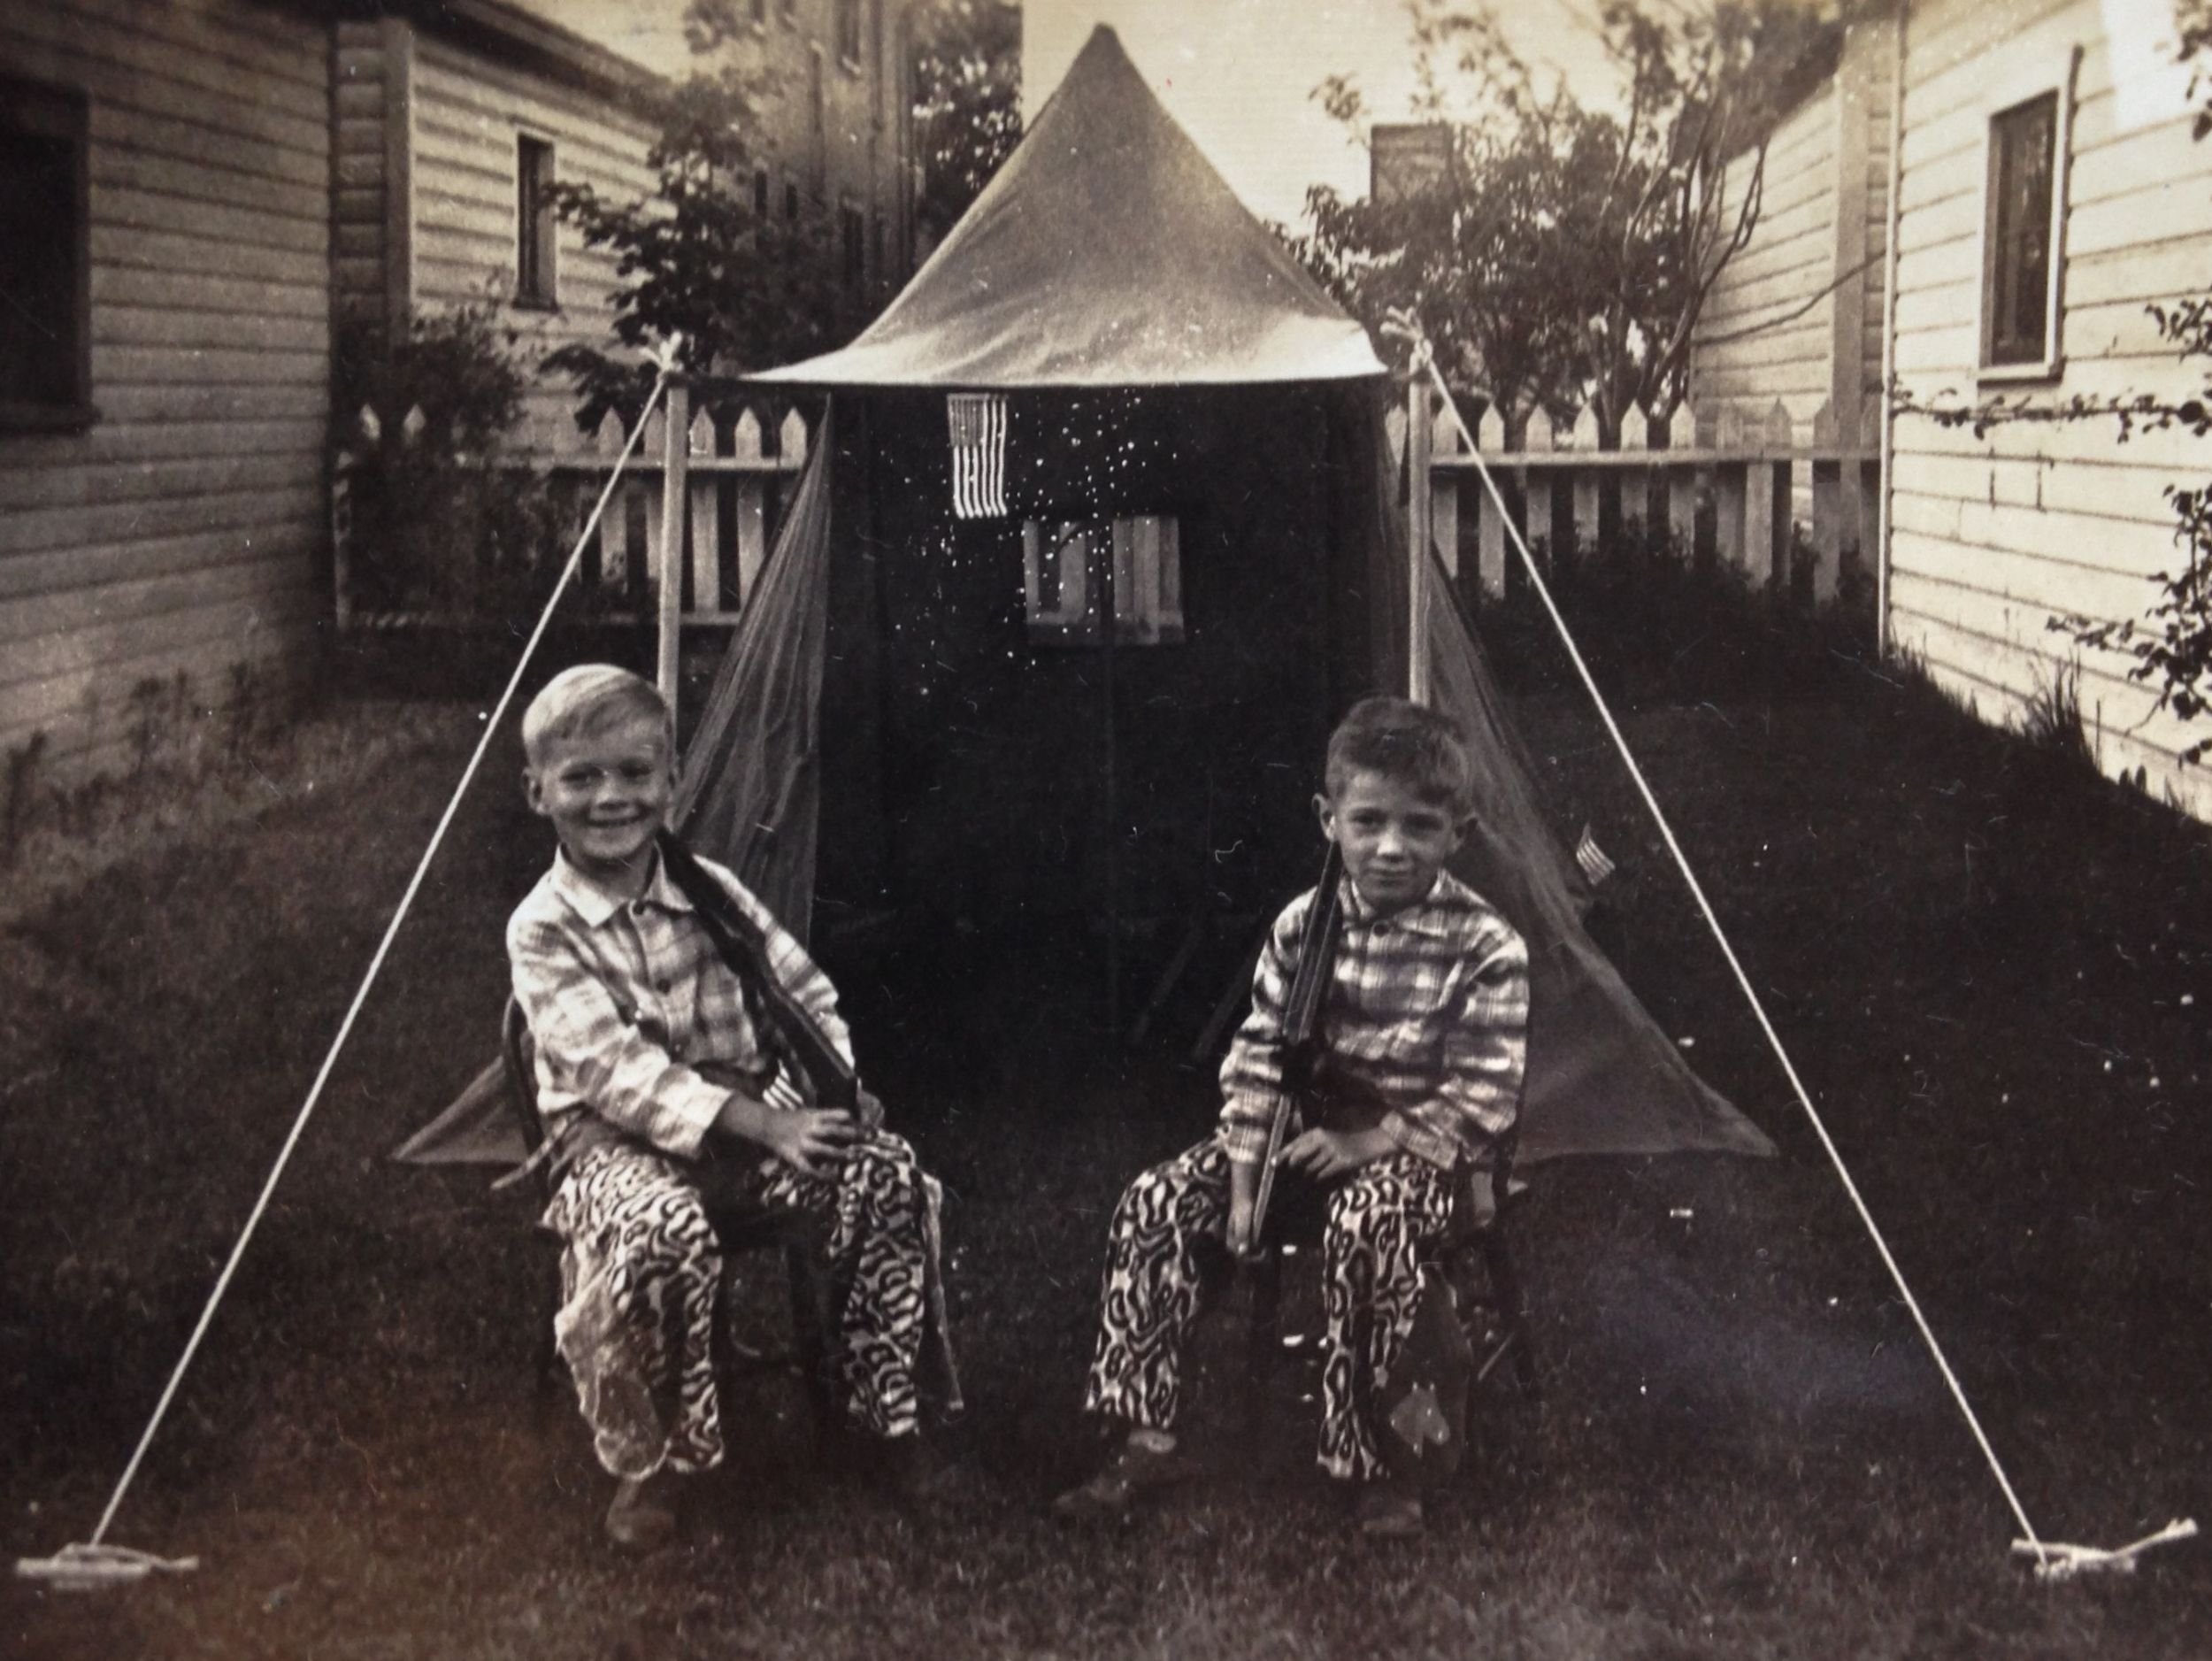 black and white image of two boys playing fort or something like that, World War II era, tent, United States flag, rifles, plaid shirts and weird cowboy leggings, probably cowhide camouflage